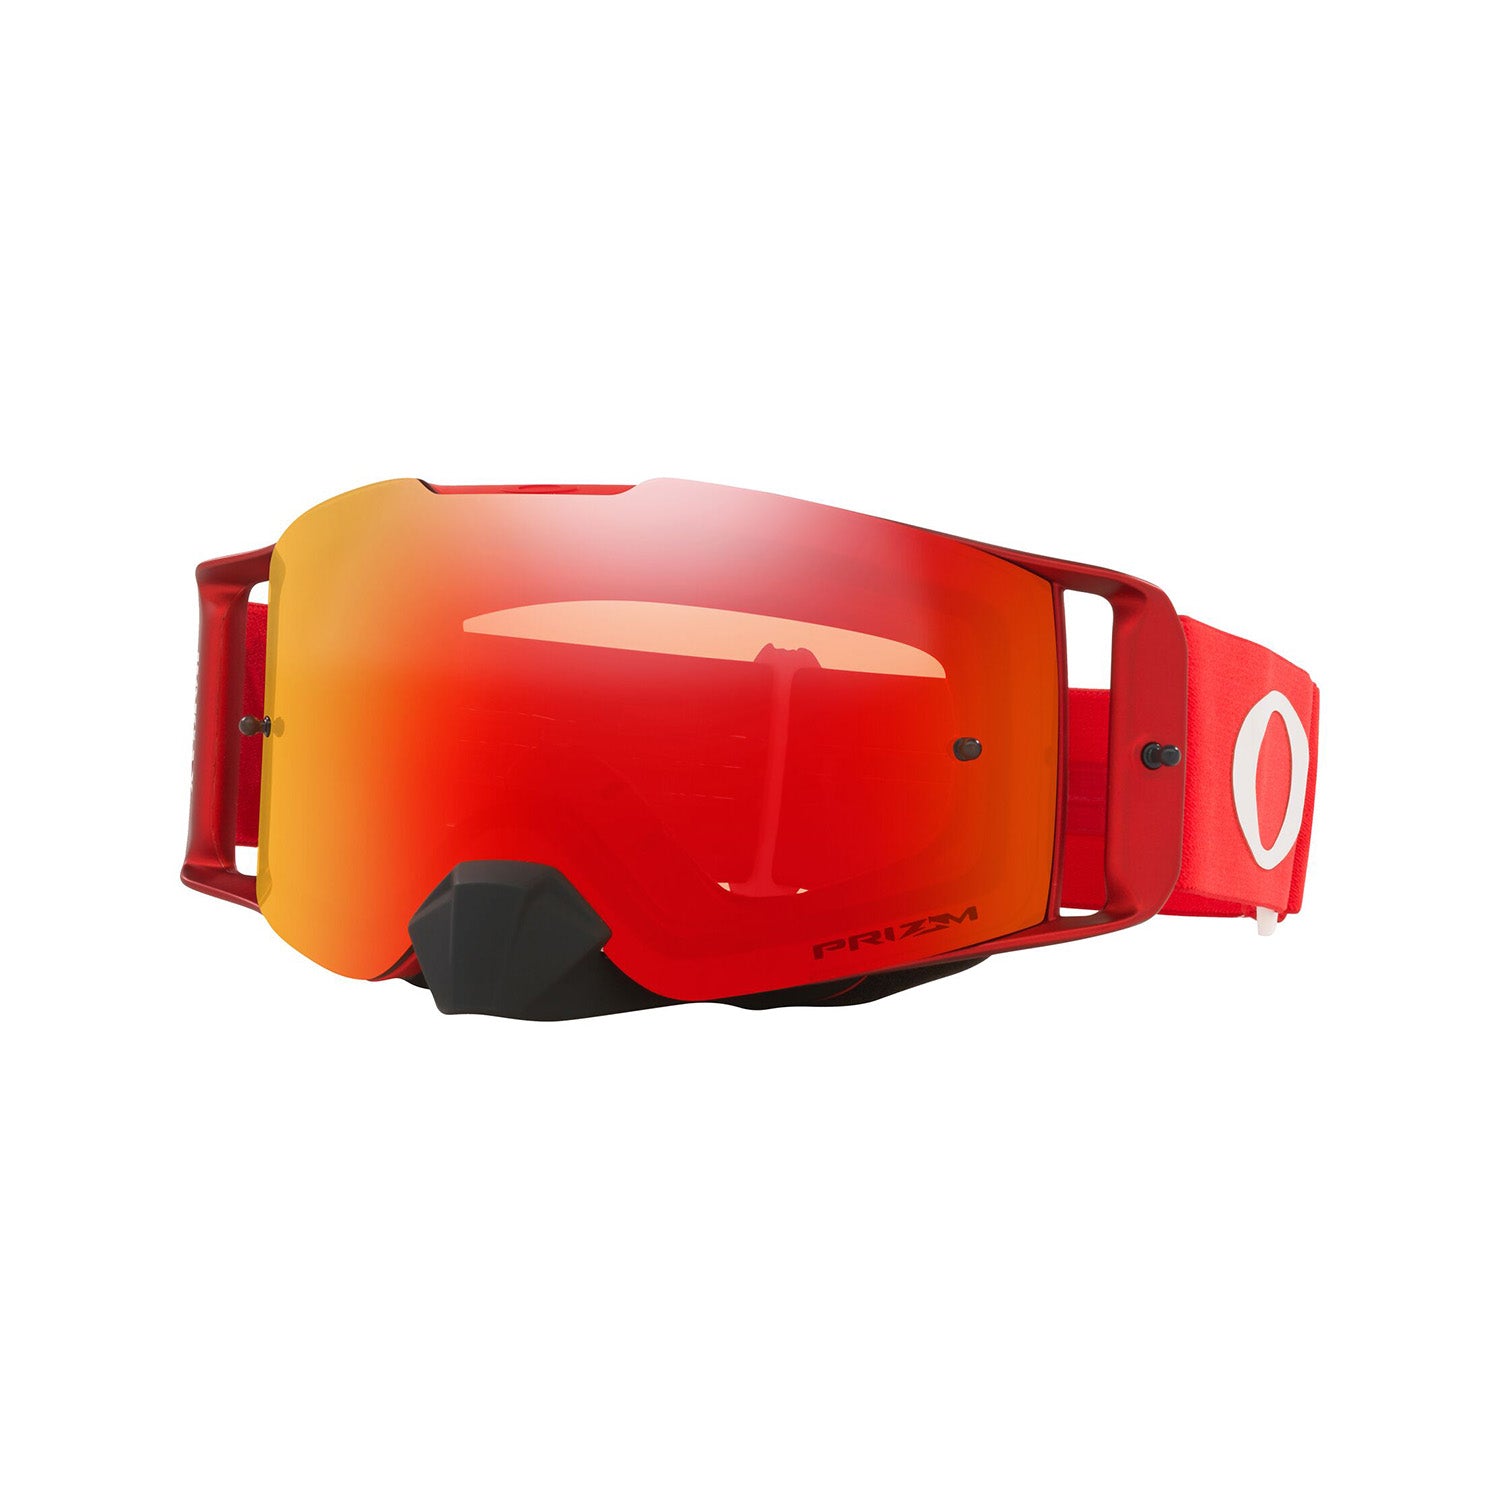 Oakley Front Line MX Goggle in Moto Red with Prizm Torch Iridium Lens